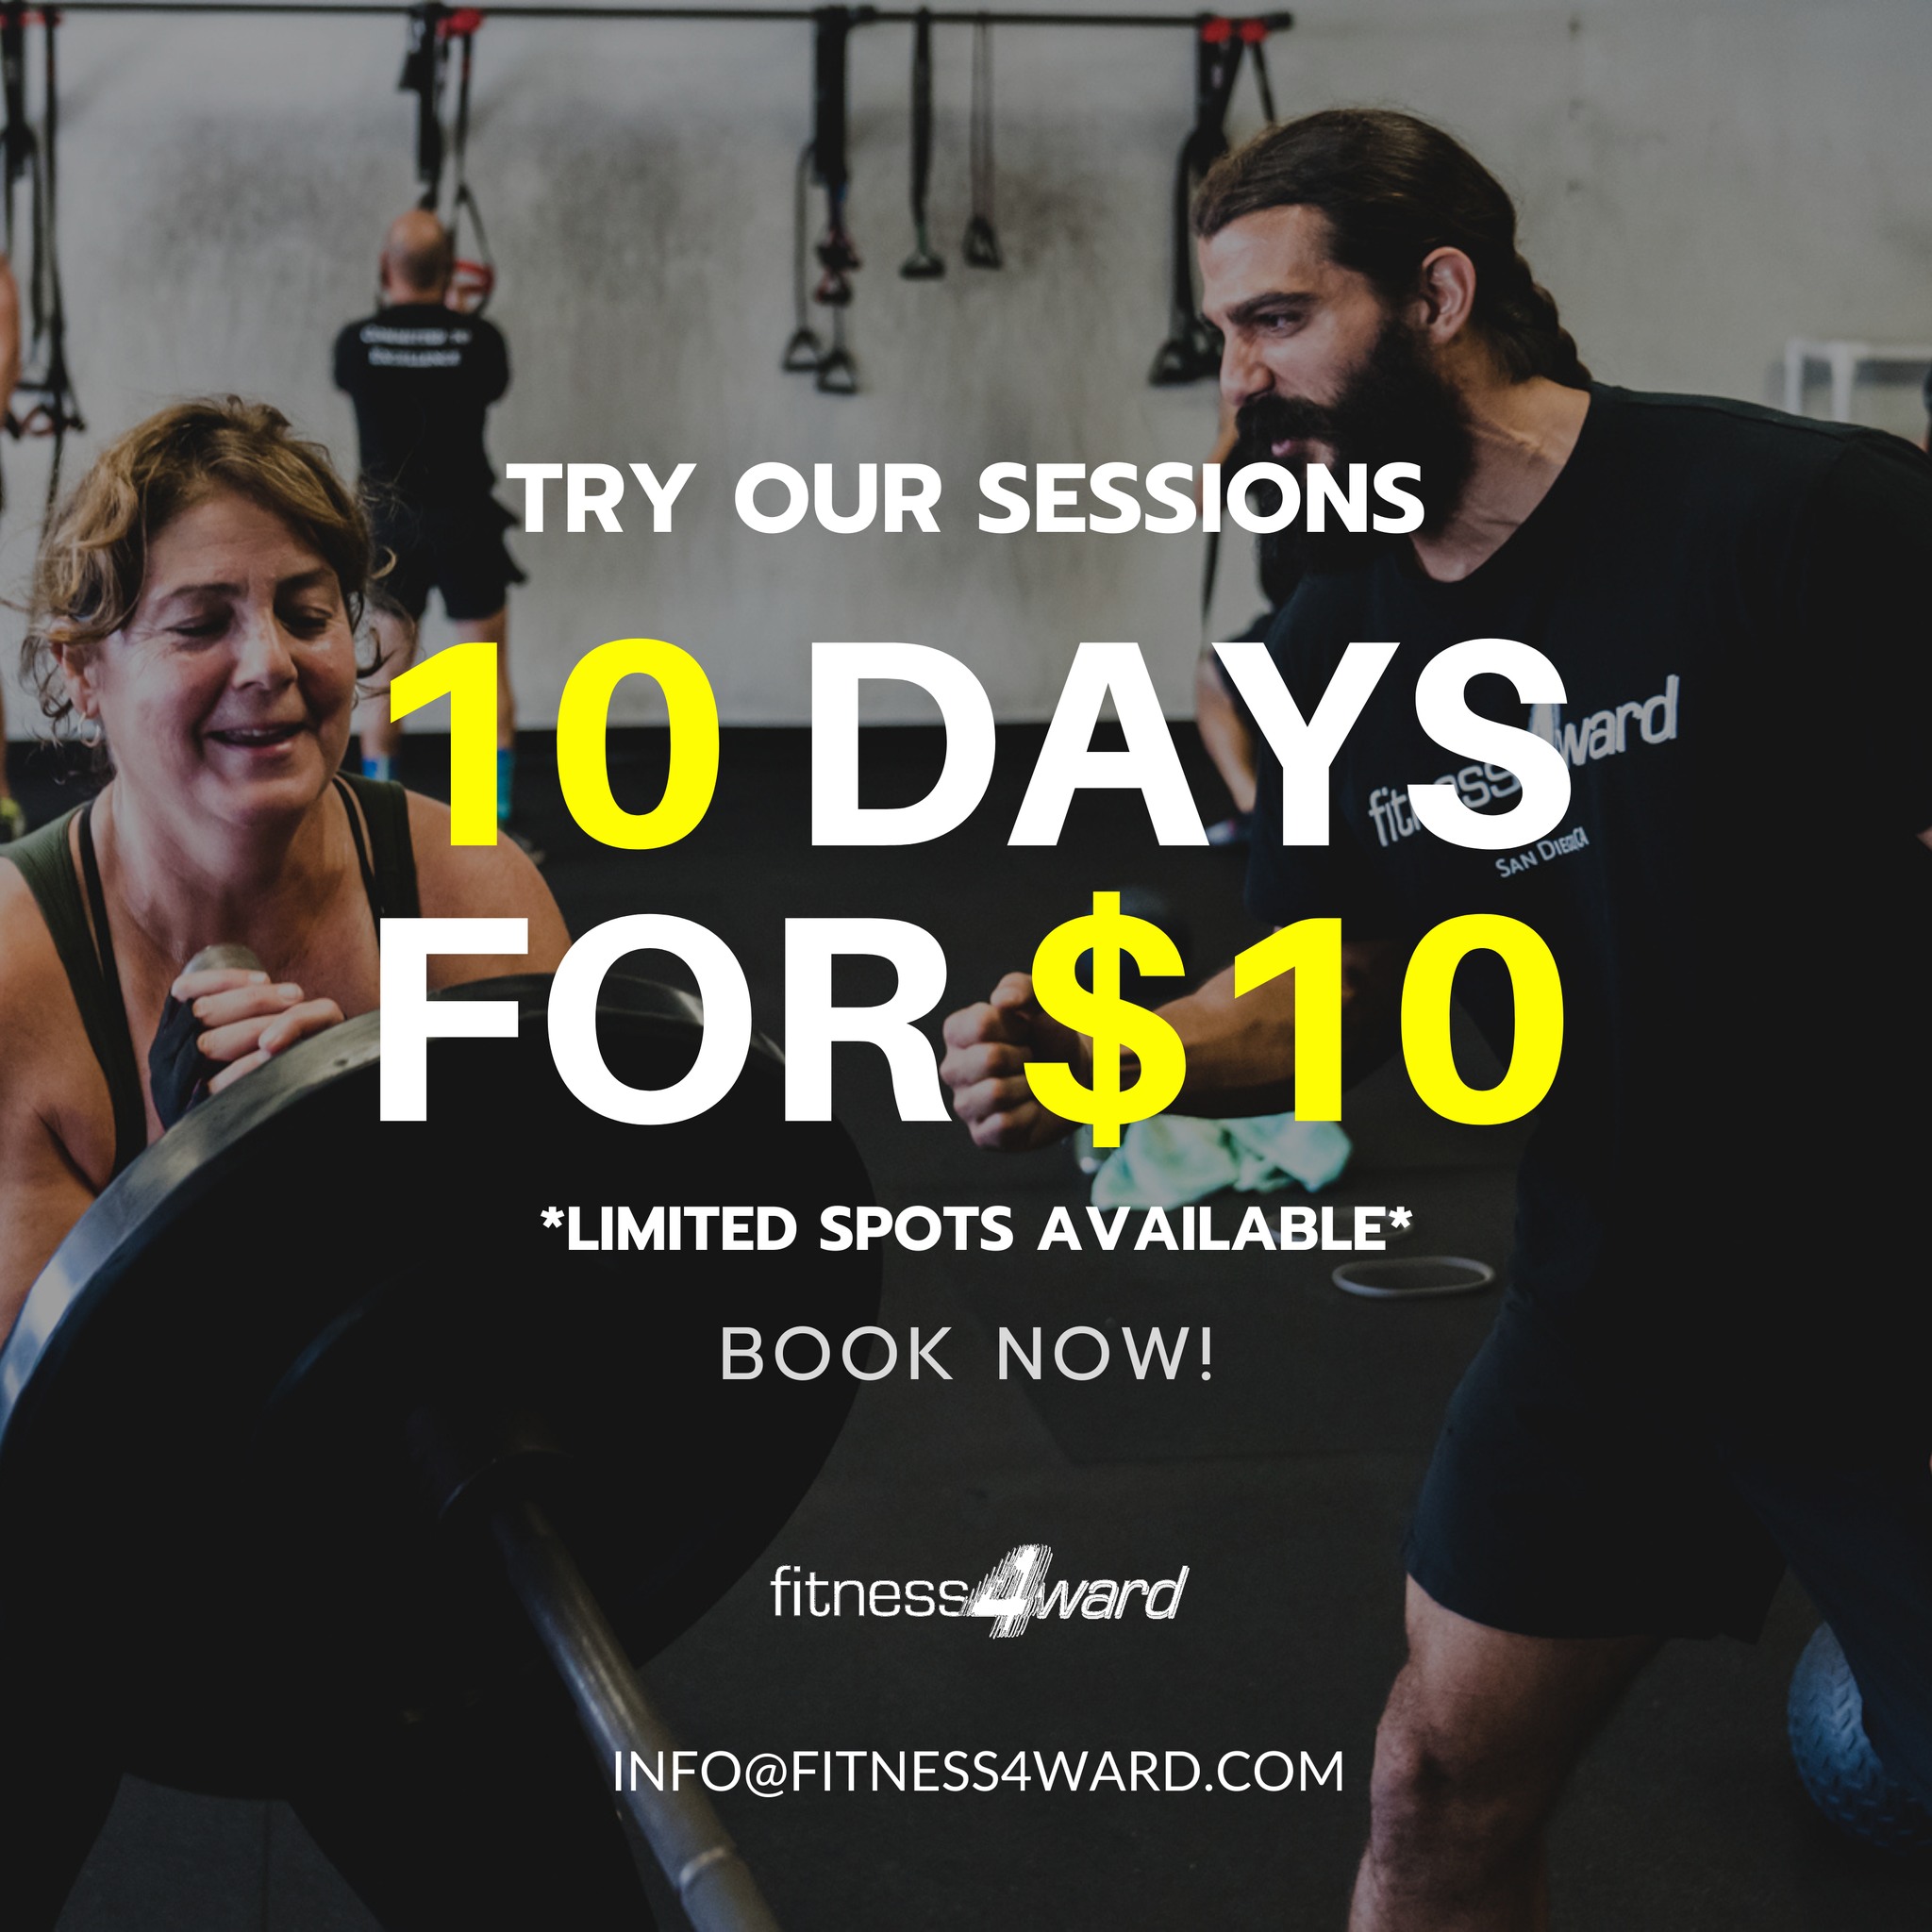 try-our-sessions-10-days-for-$10